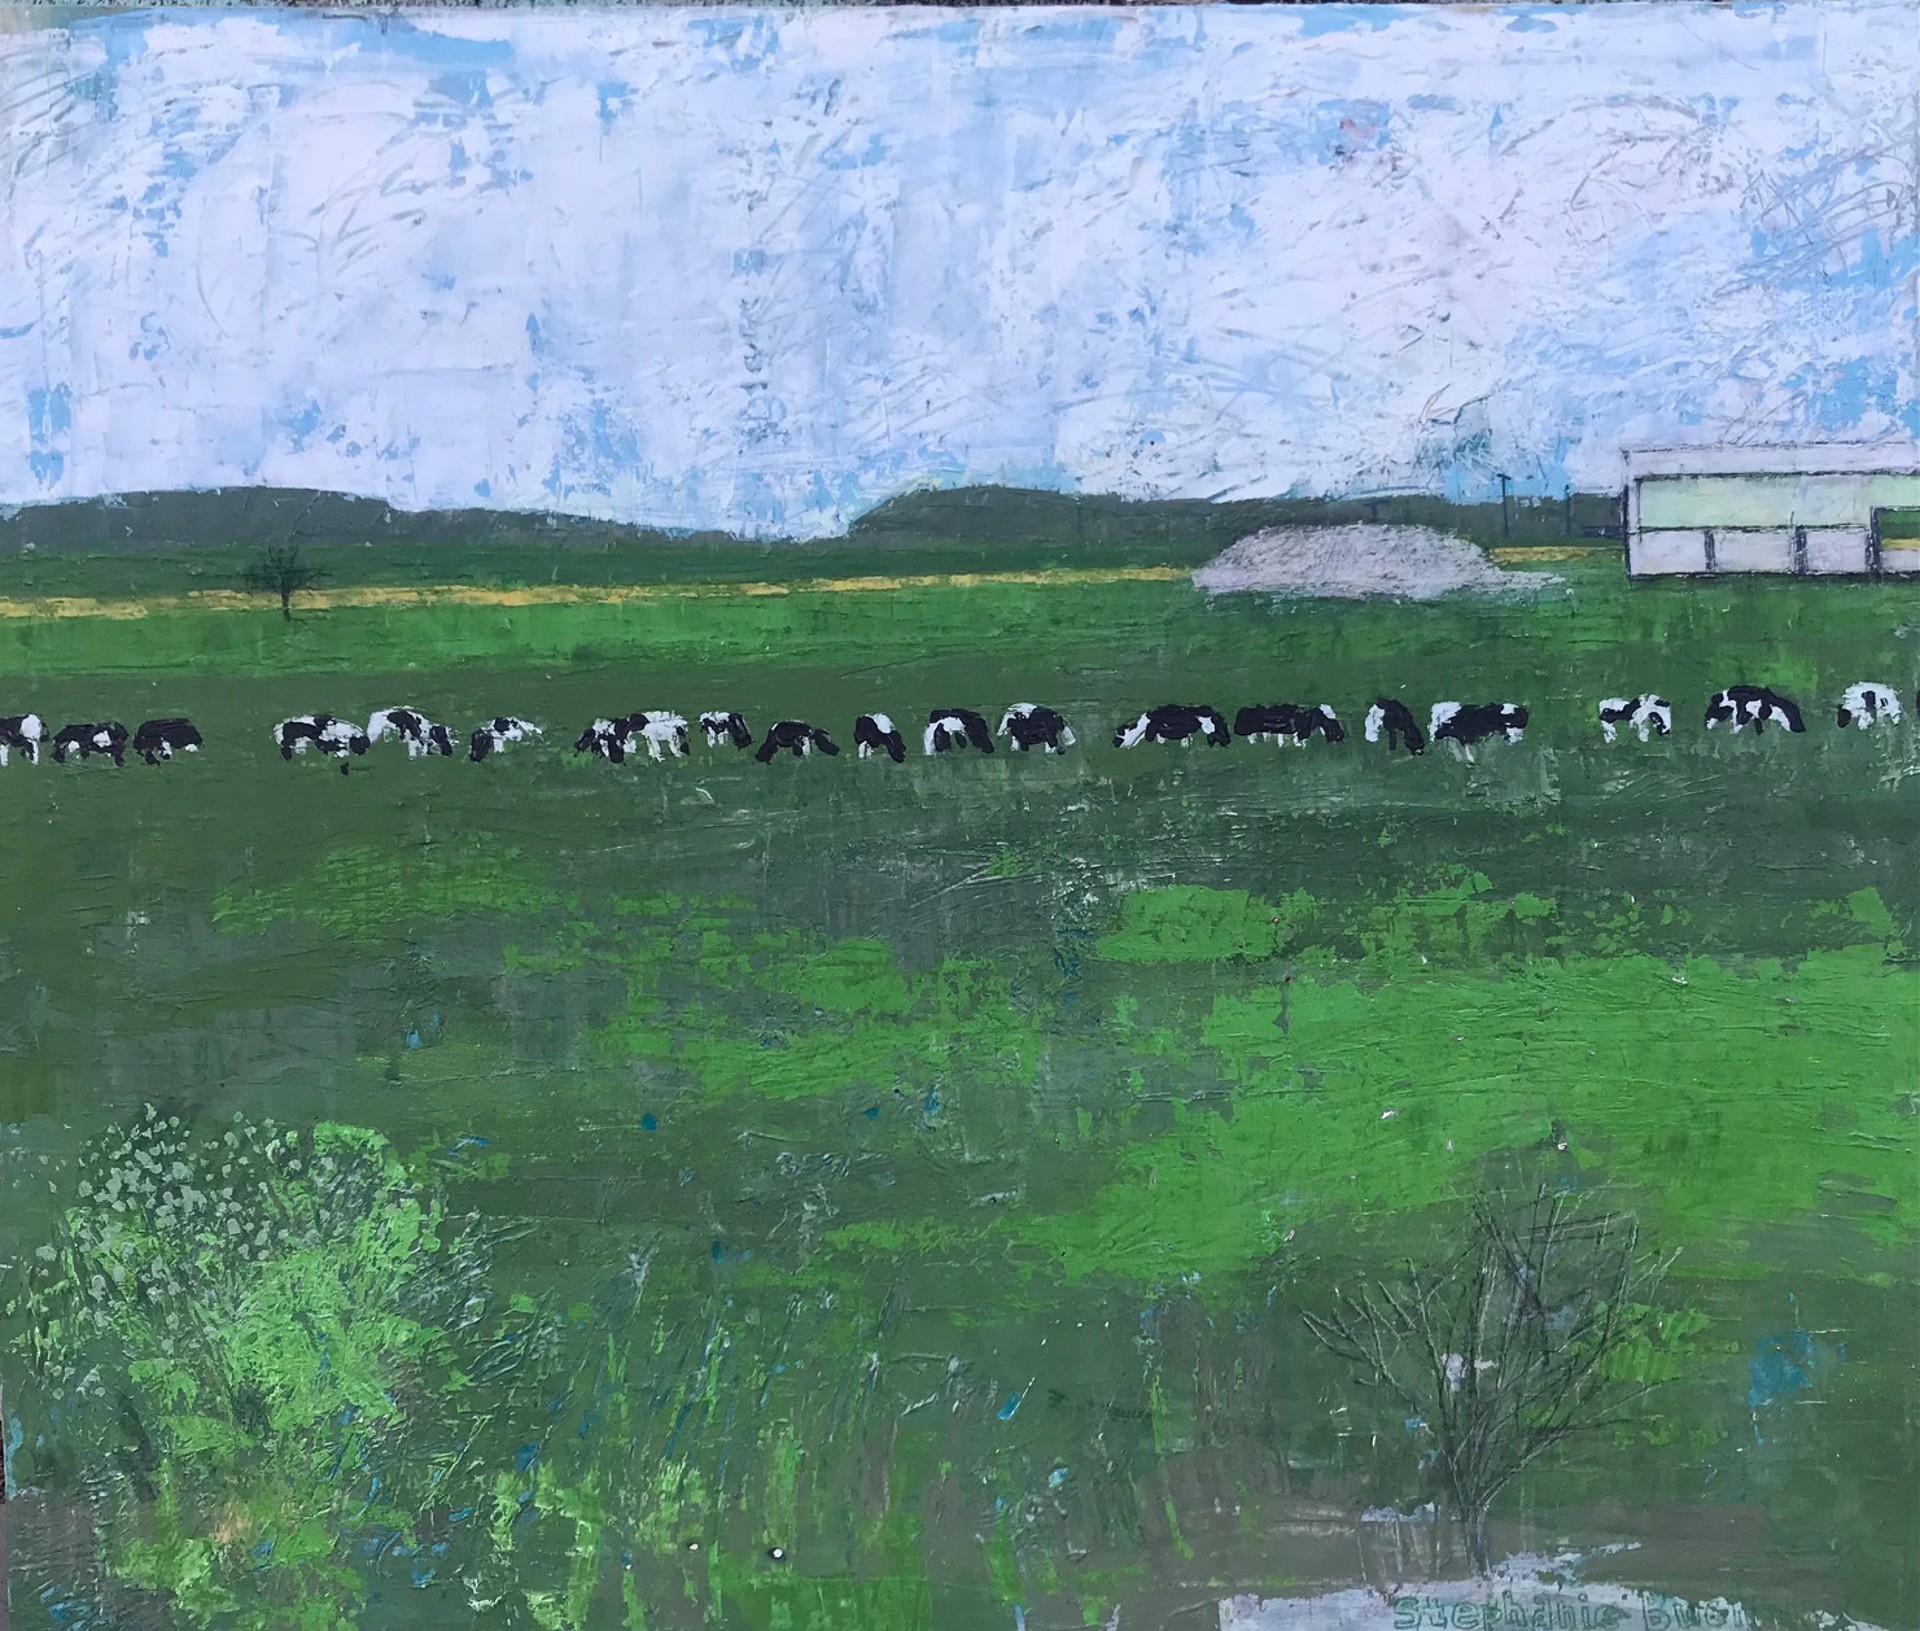 The Road To Paris 1 (Cows) by Stephanie Bucholz